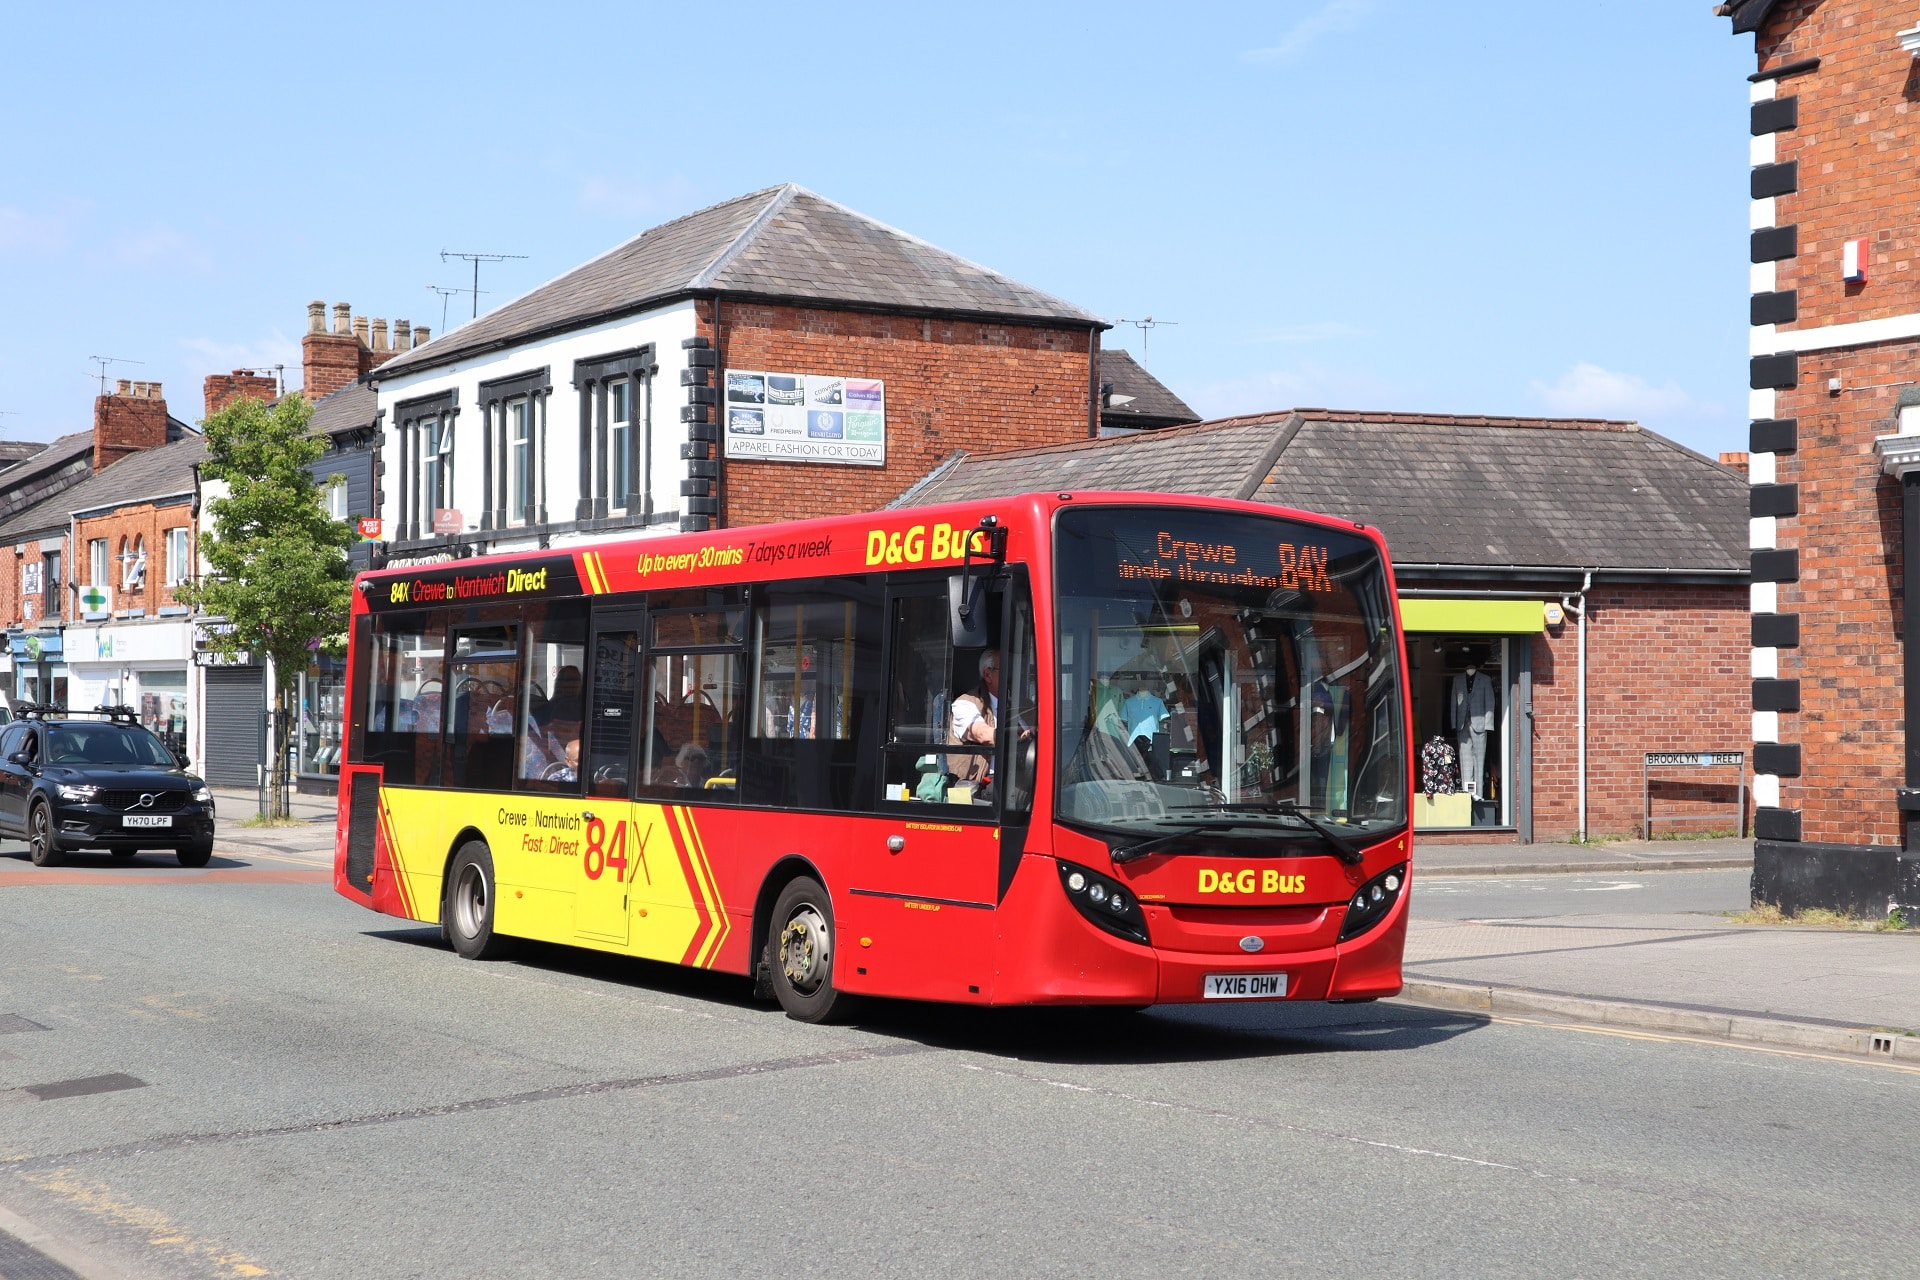 Use of funding uncertainty for short notice bus service registration change should cease